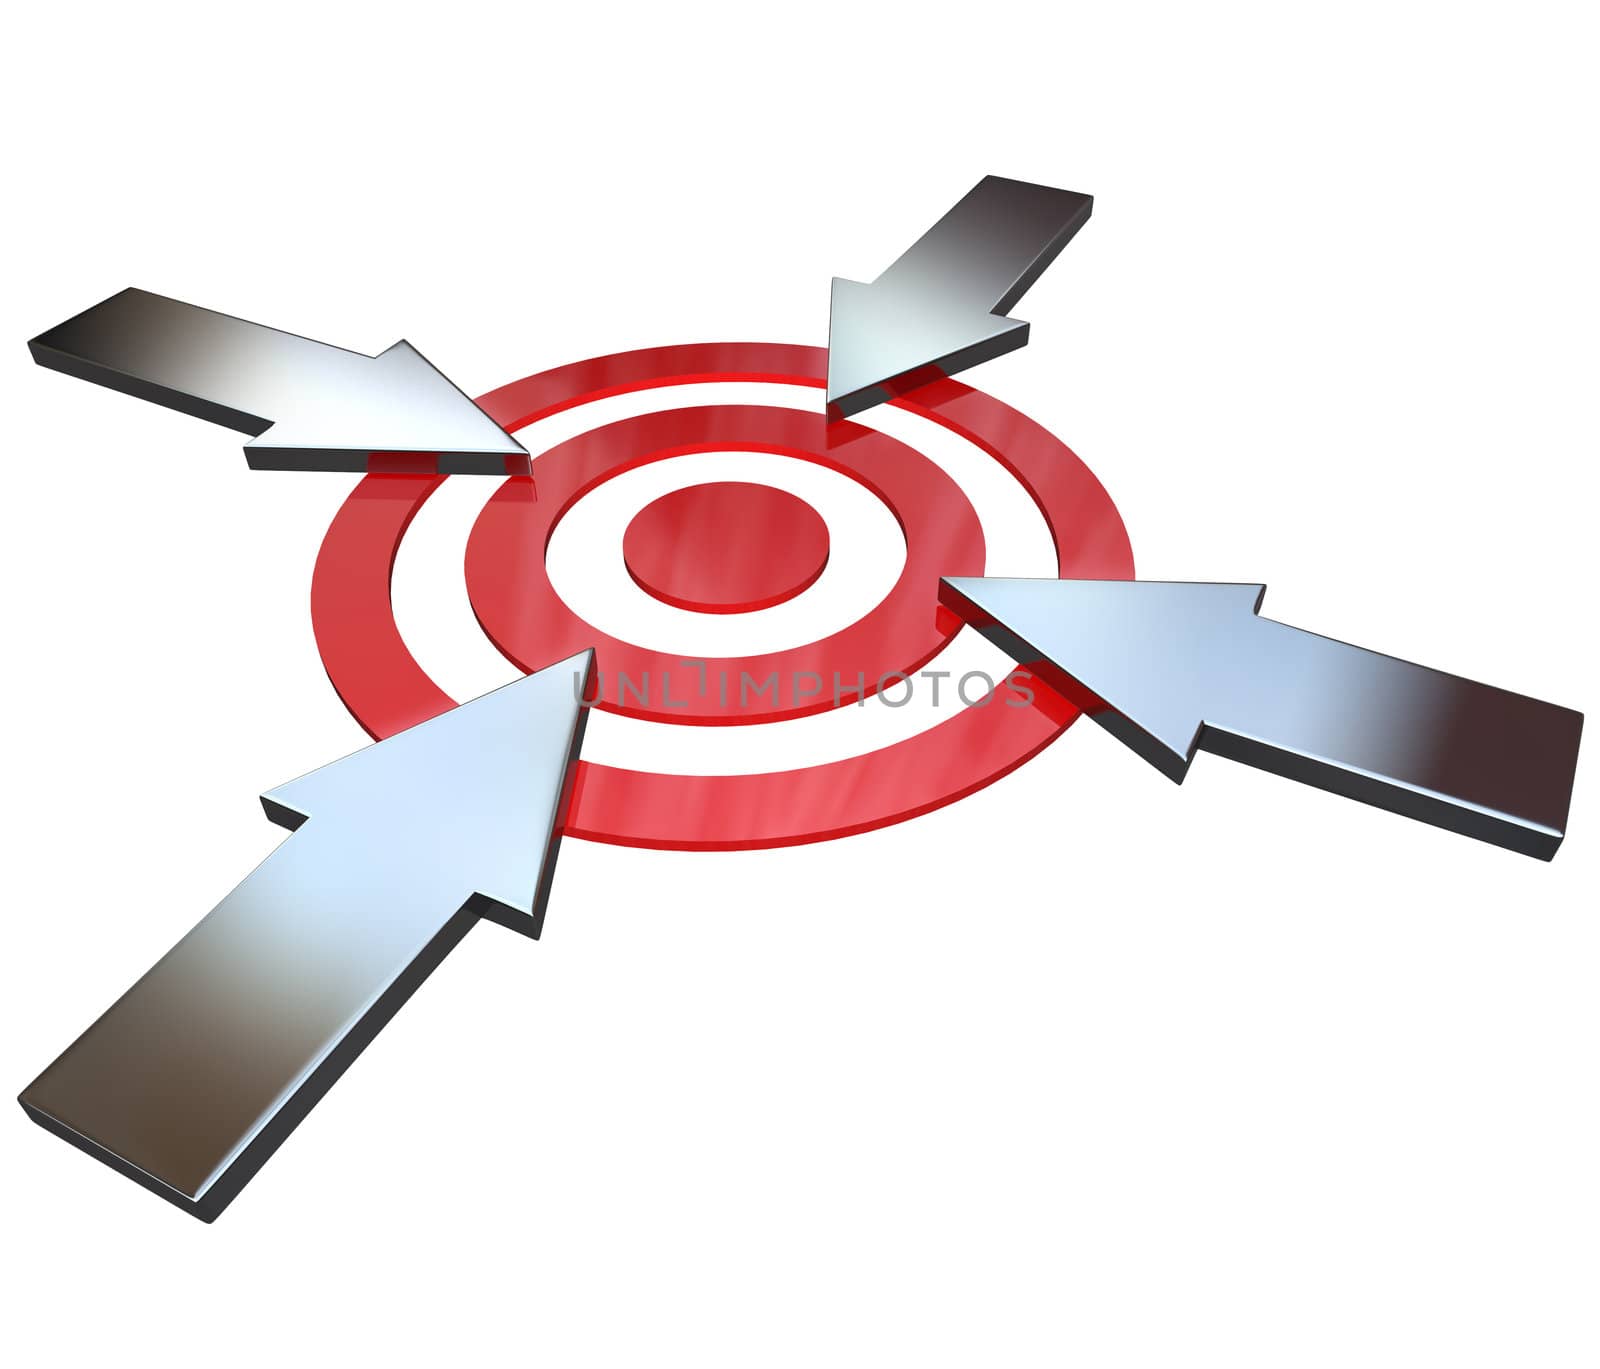 Four opposing arrows approach a bullseye target from 4 different directions in competition to be first to be successful and reach the goal and win